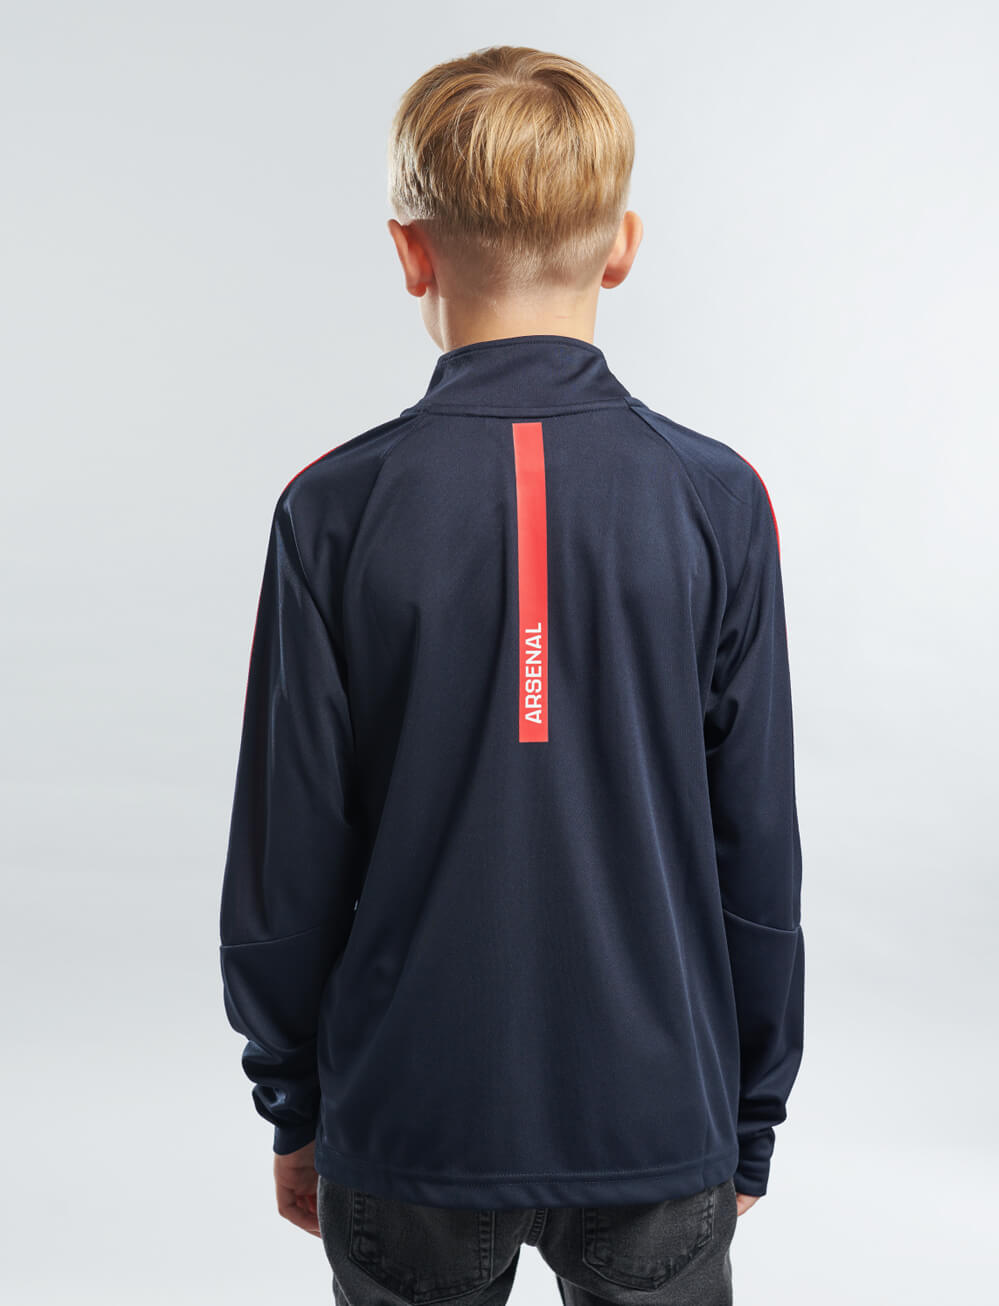 Official Arsenal Kids 1/4 Zip Track Top - Navy - The World Football Store